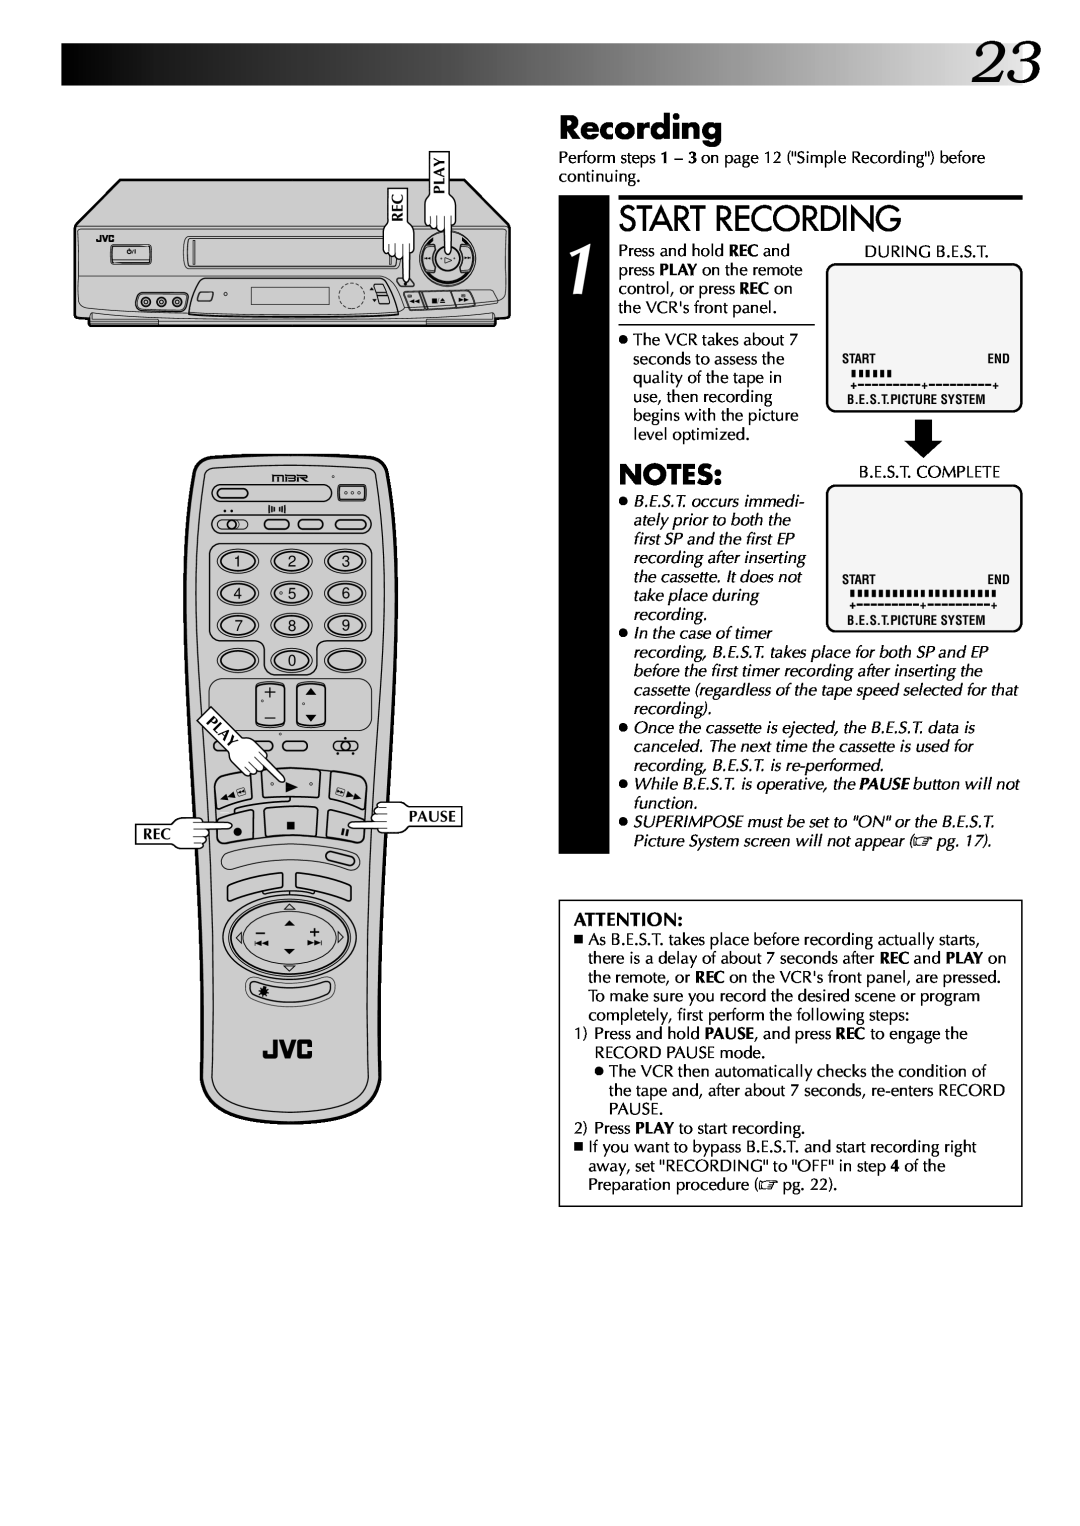 JVC HR-J7004UM manual Start Recording, the cassette. It does not, take place during, recording, In the case of timer 